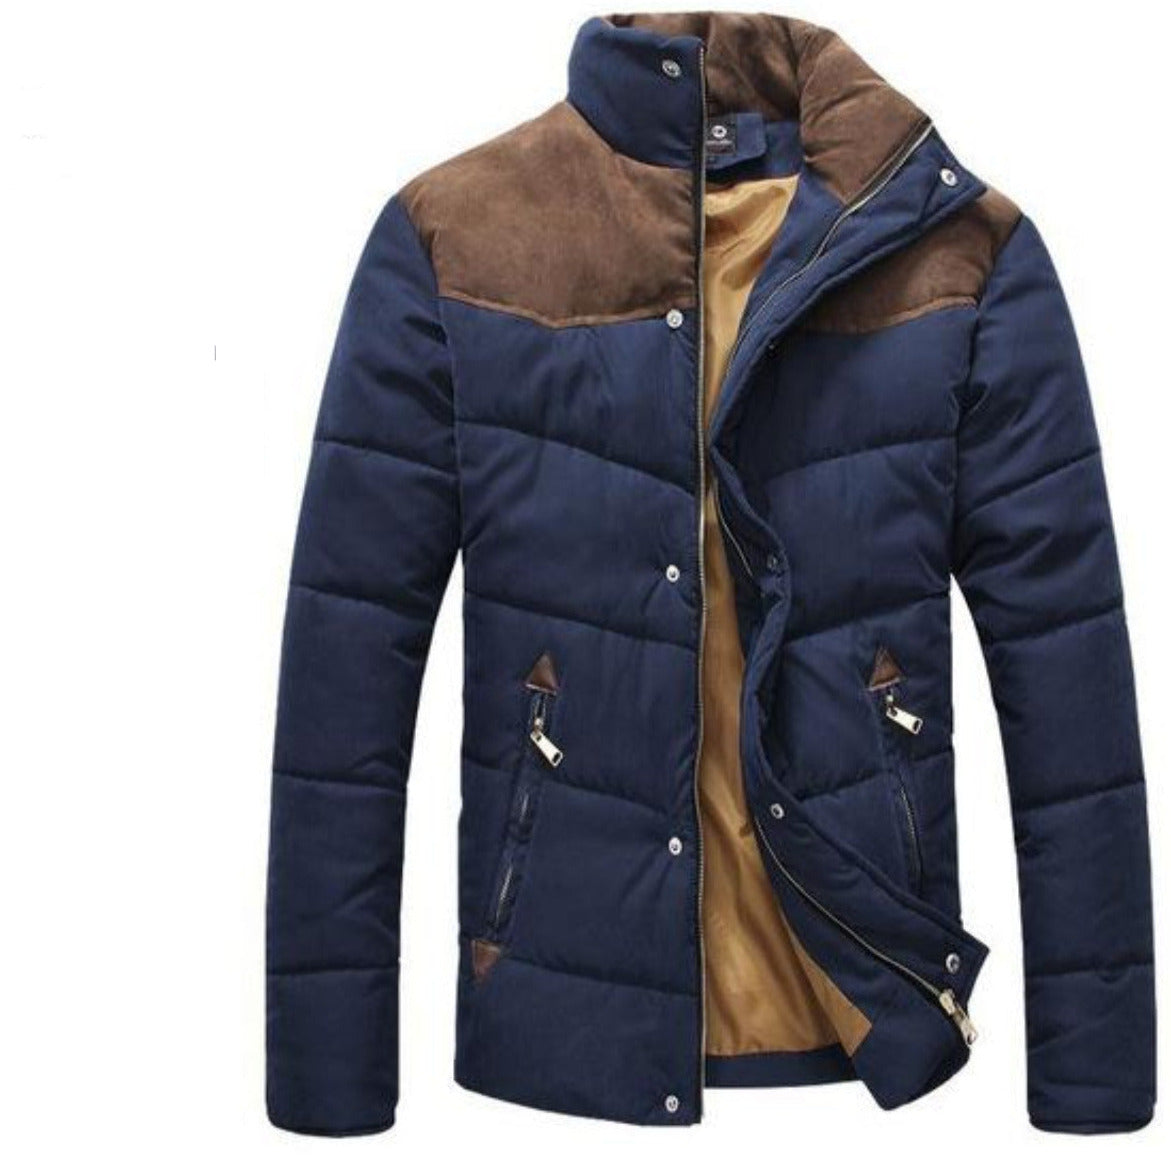 Mens Navy Puffer Jacket with Stand Up Collar and Zippered Pockets - AmtifyDirect